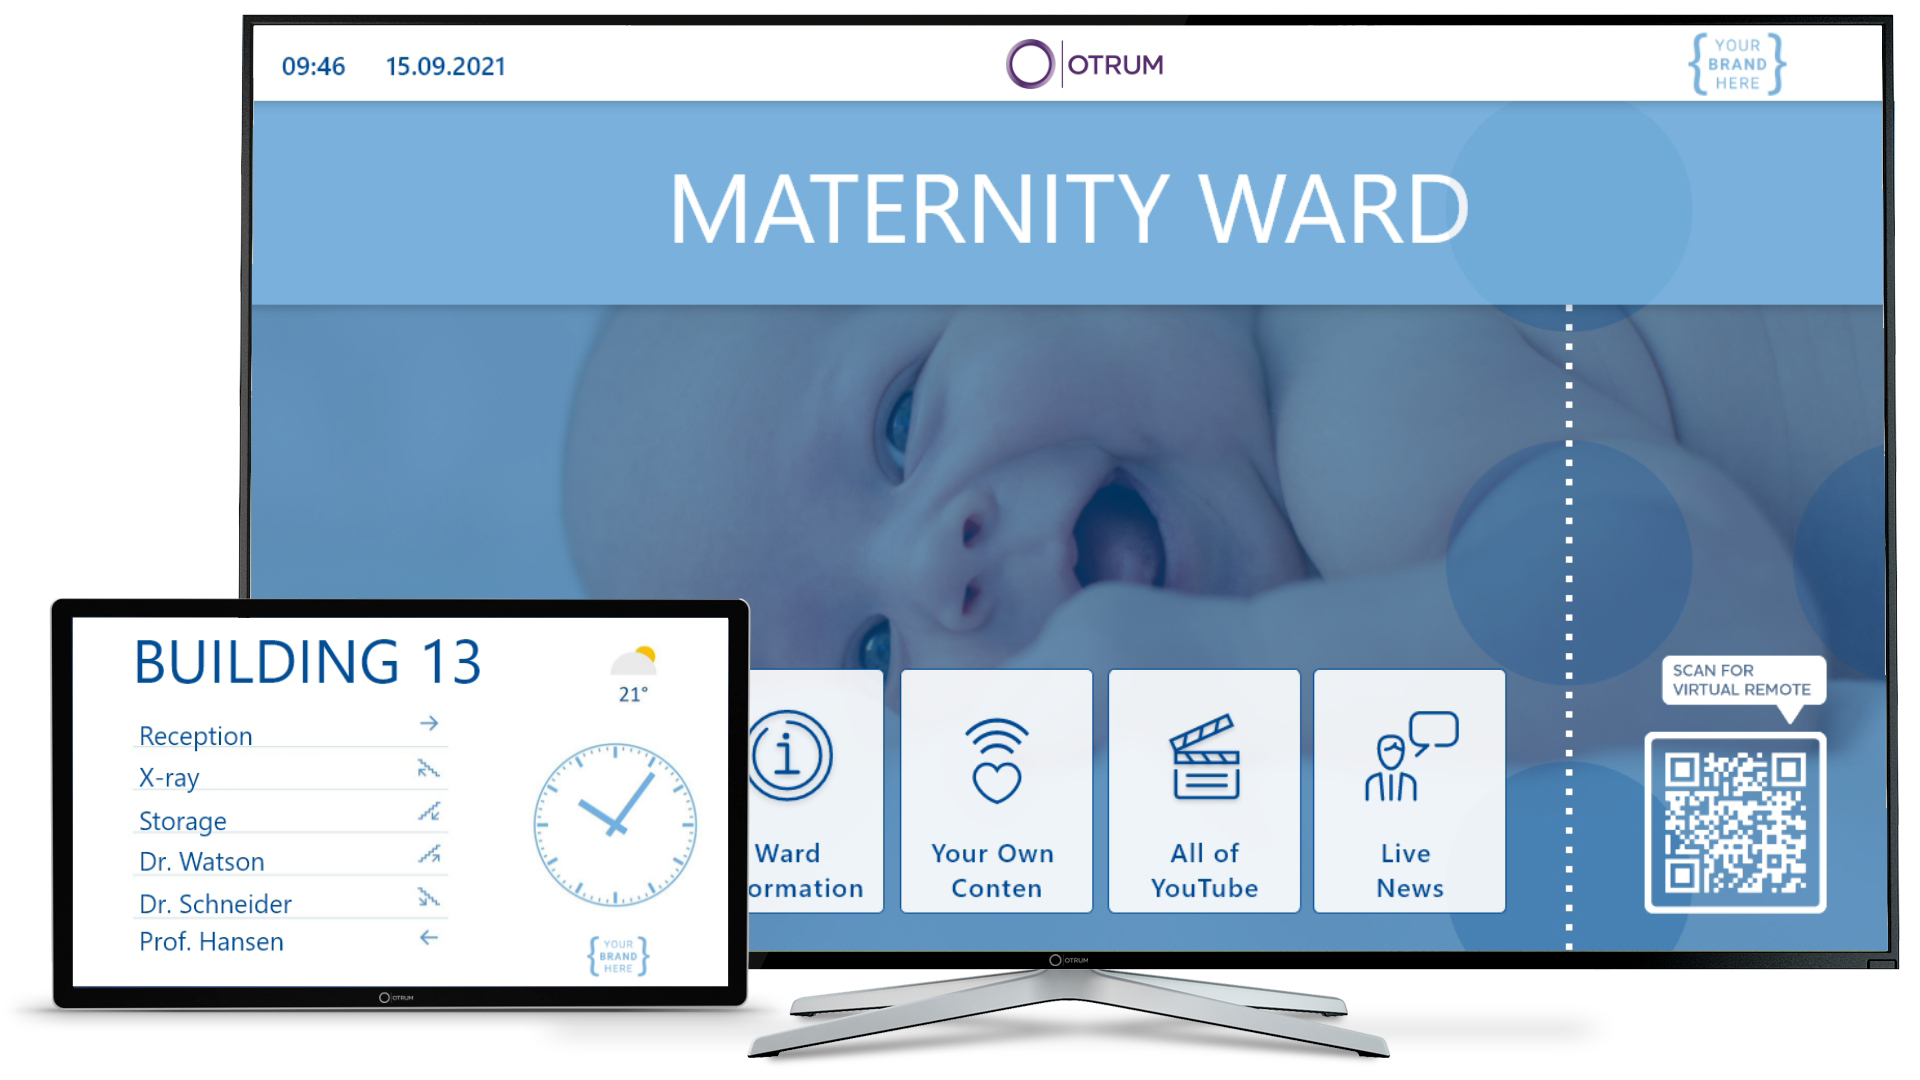 Enhancing the patient experience through innovative TV portal application